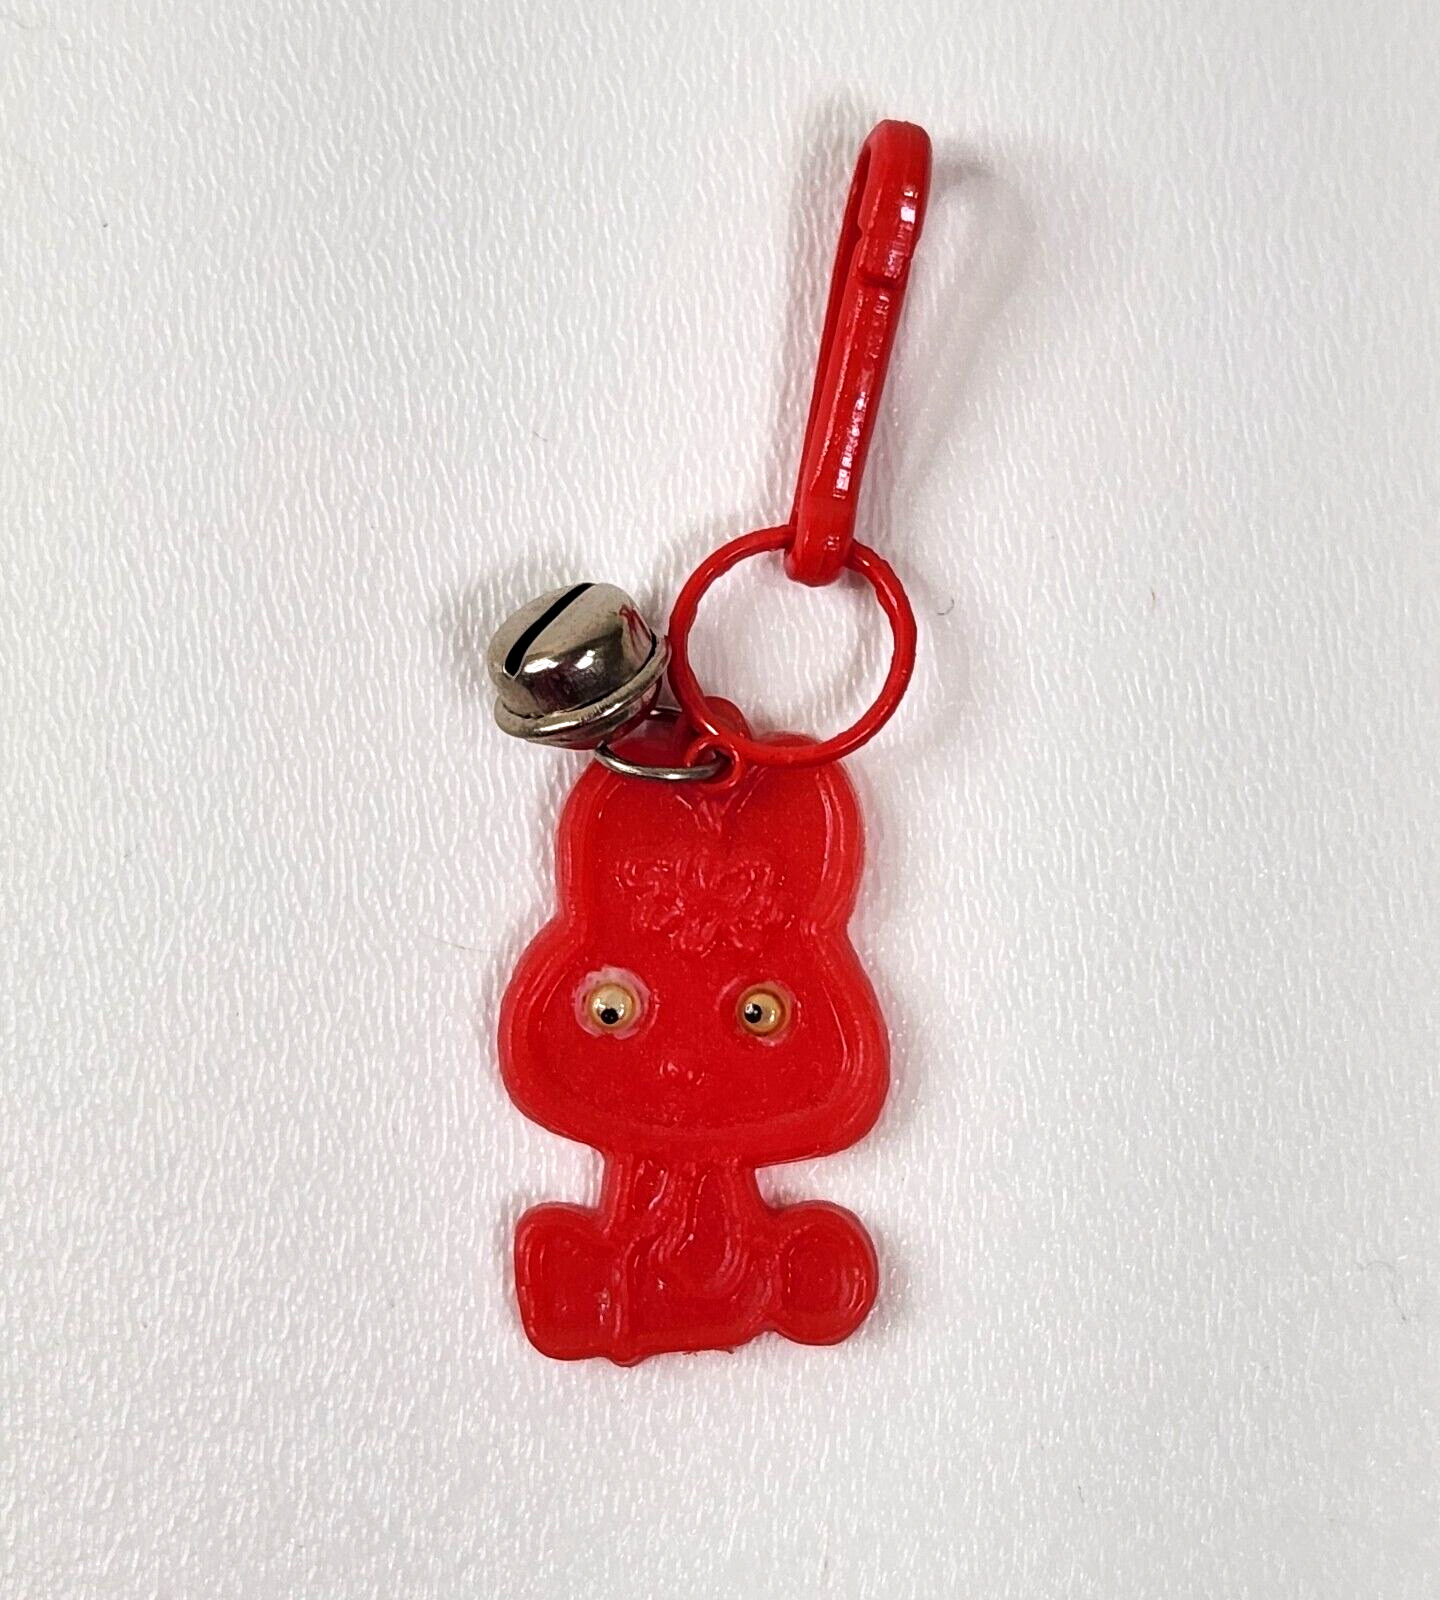 Vintage 1980s Plastic Bell Charm Bunny For 80s Necklace